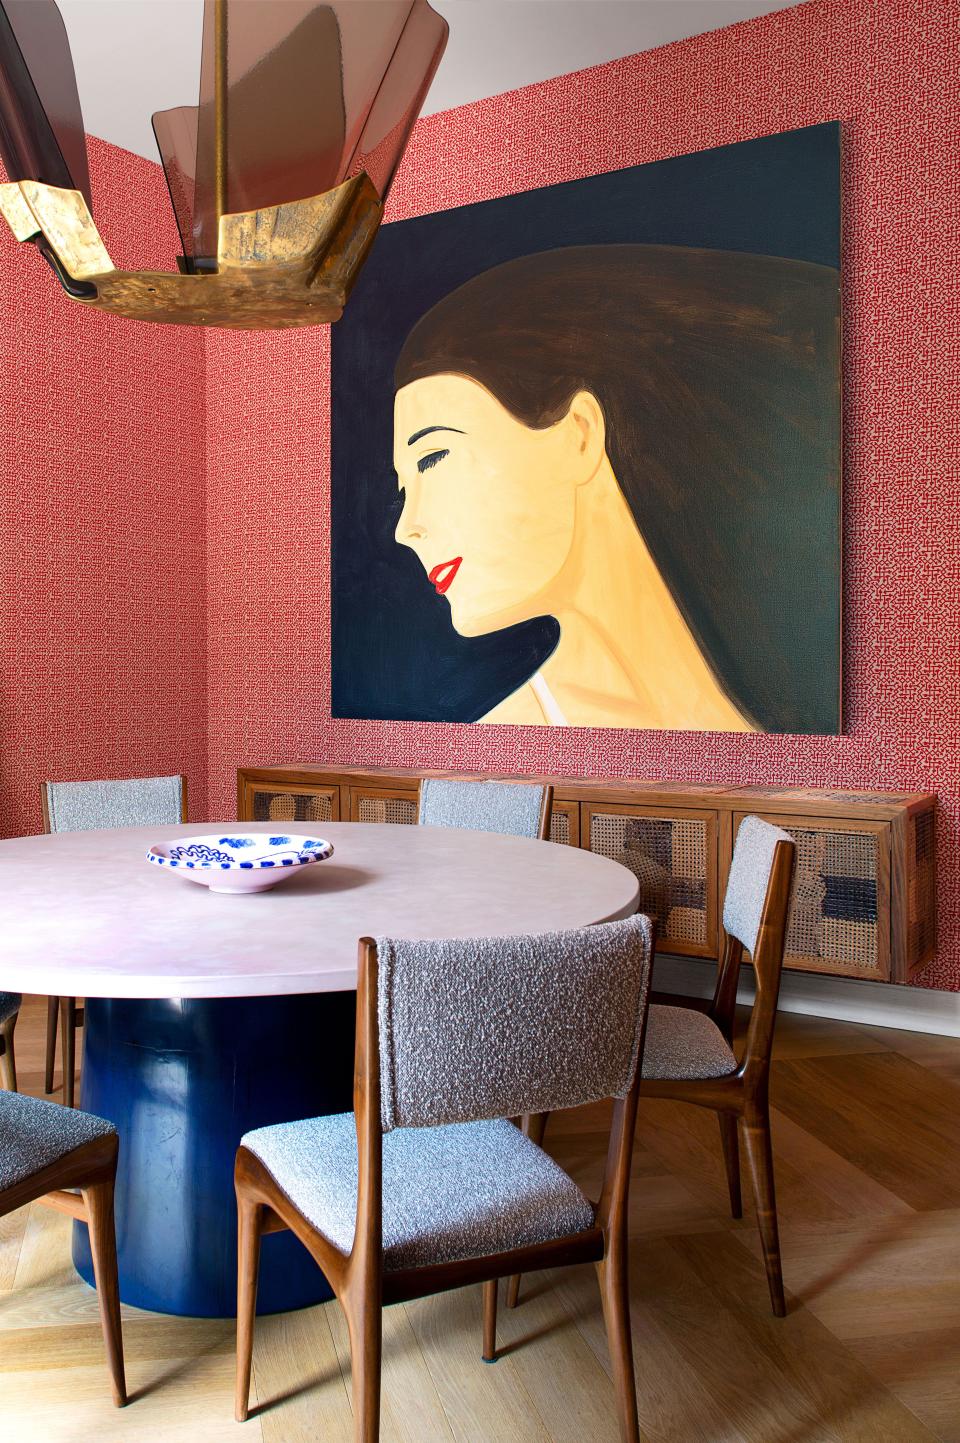 An Alex Katz portrait is displayed in the dining room. Vincenzo de Cotiis pendant; Lola Lely table; Carlo de Carli chairs; on walls, woven silk by Fortuny.